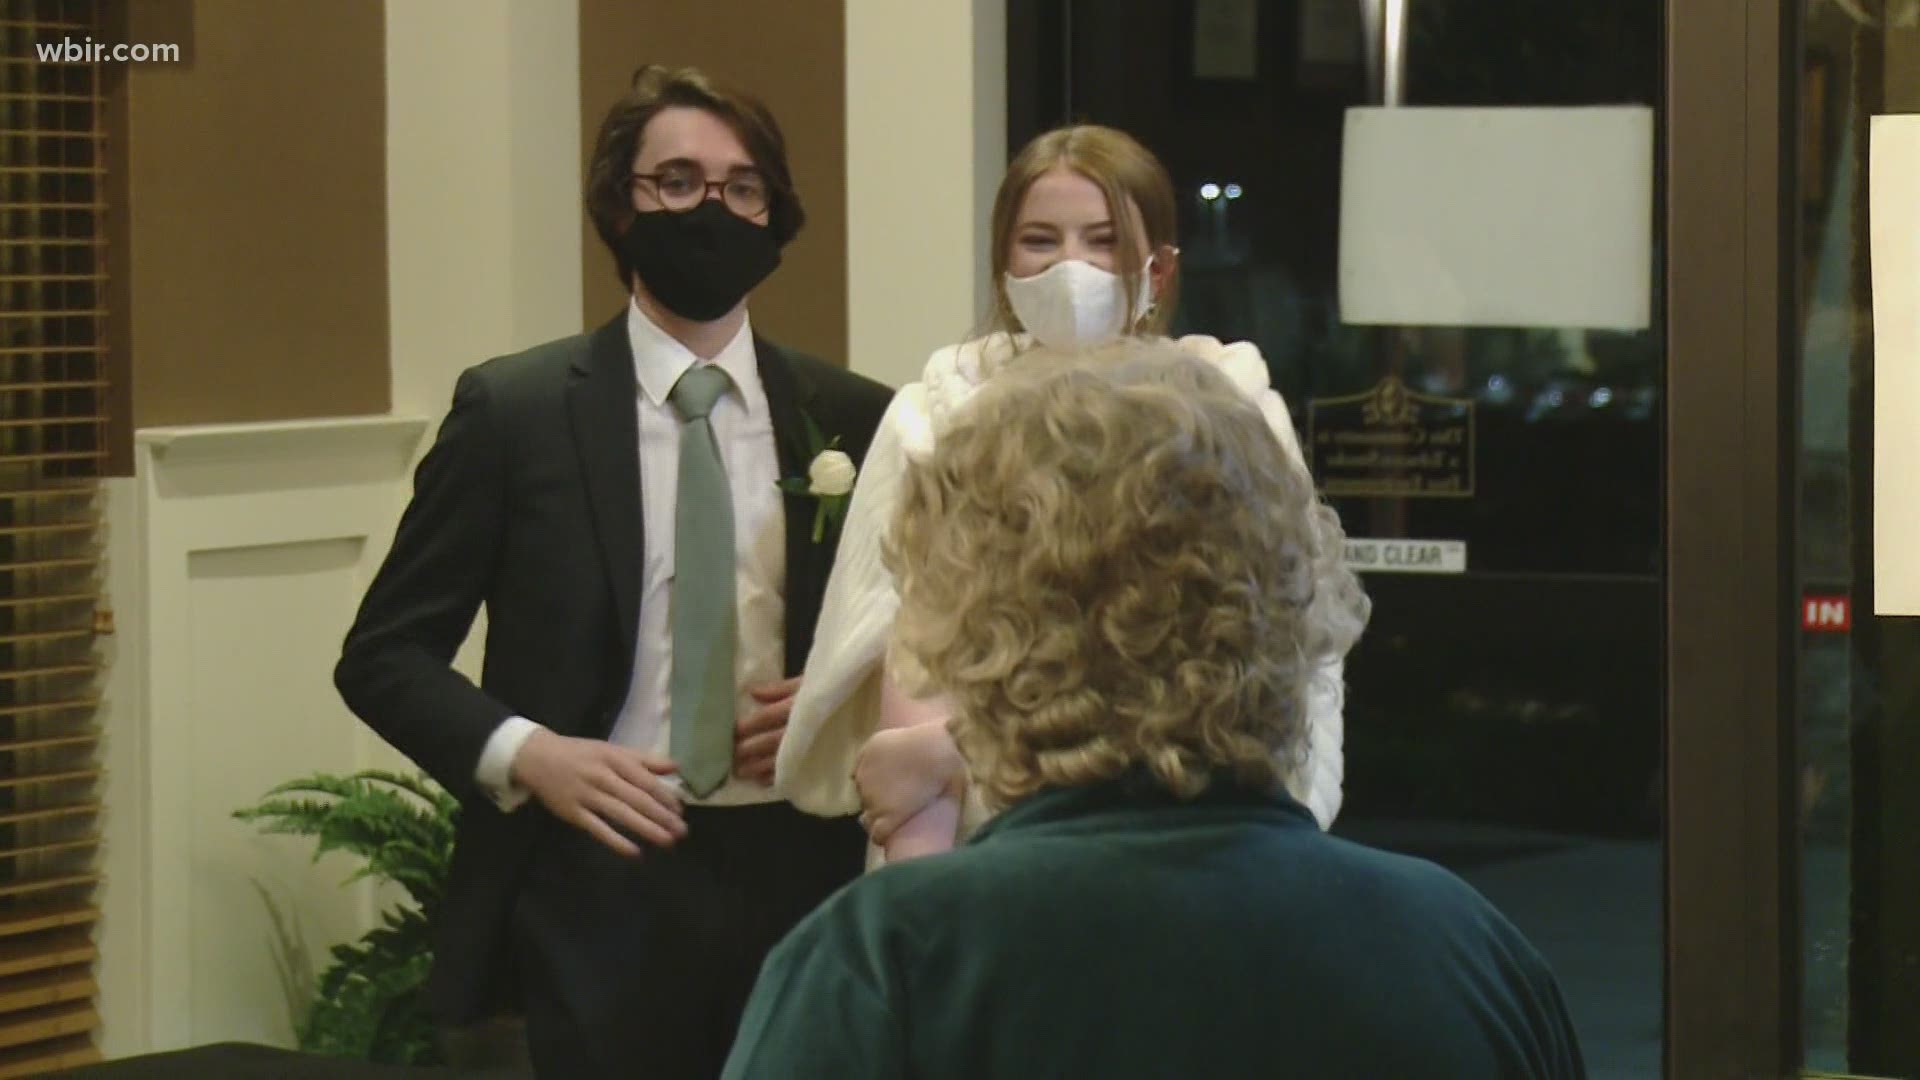 Mary Ellen Whittaker's youngest grandson got married, and then surprised her at her long-term care facility.